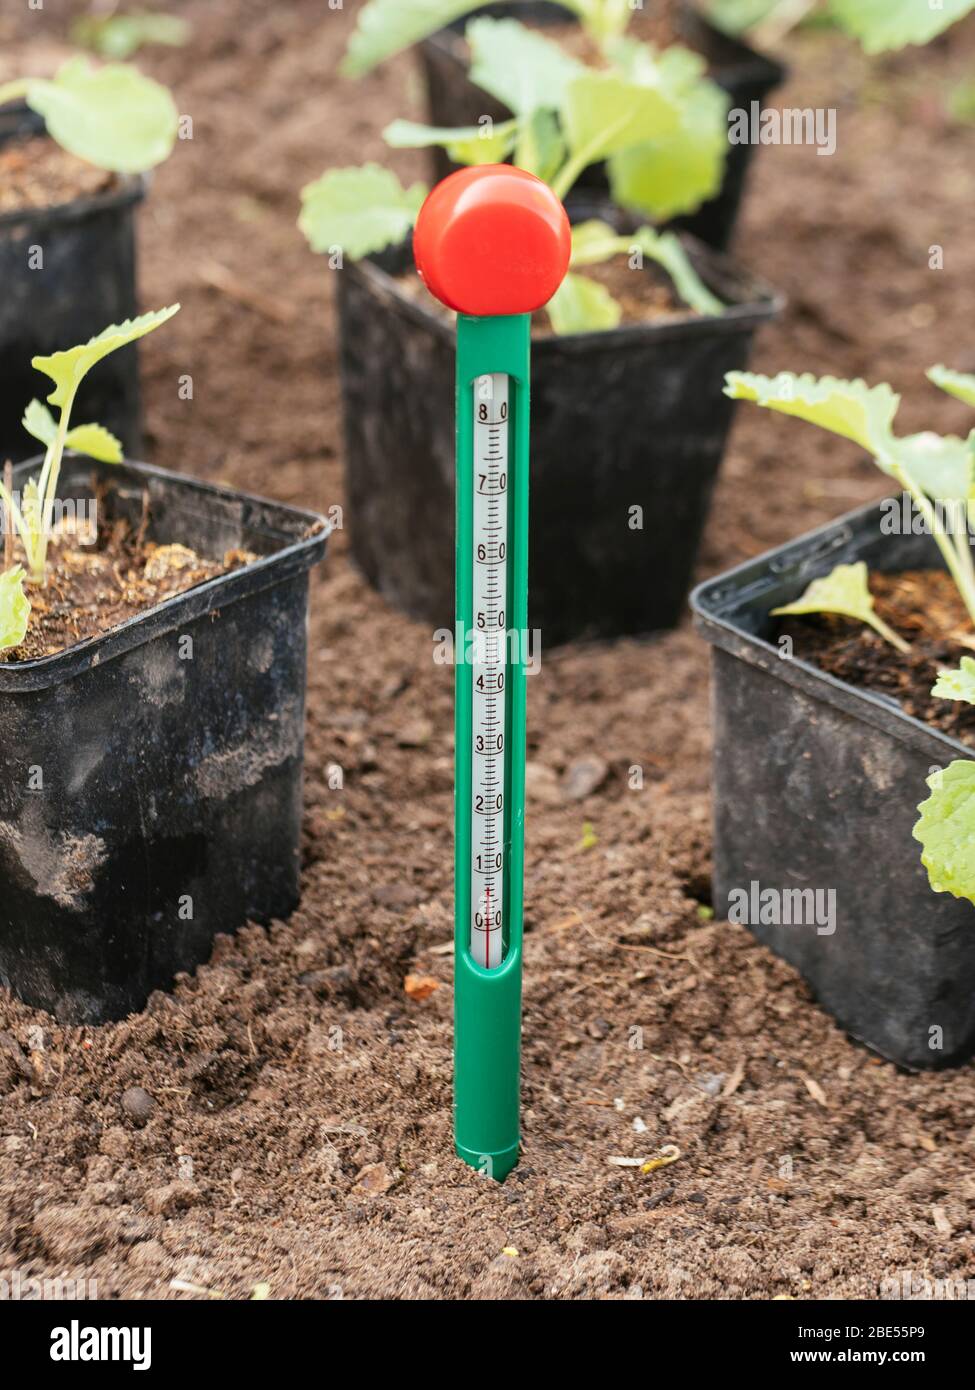 https://c8.alamy.com/comp/2BE55P9/soil-thermometer-measuring-the-temperature-in-spring-2BE55P9.jpg